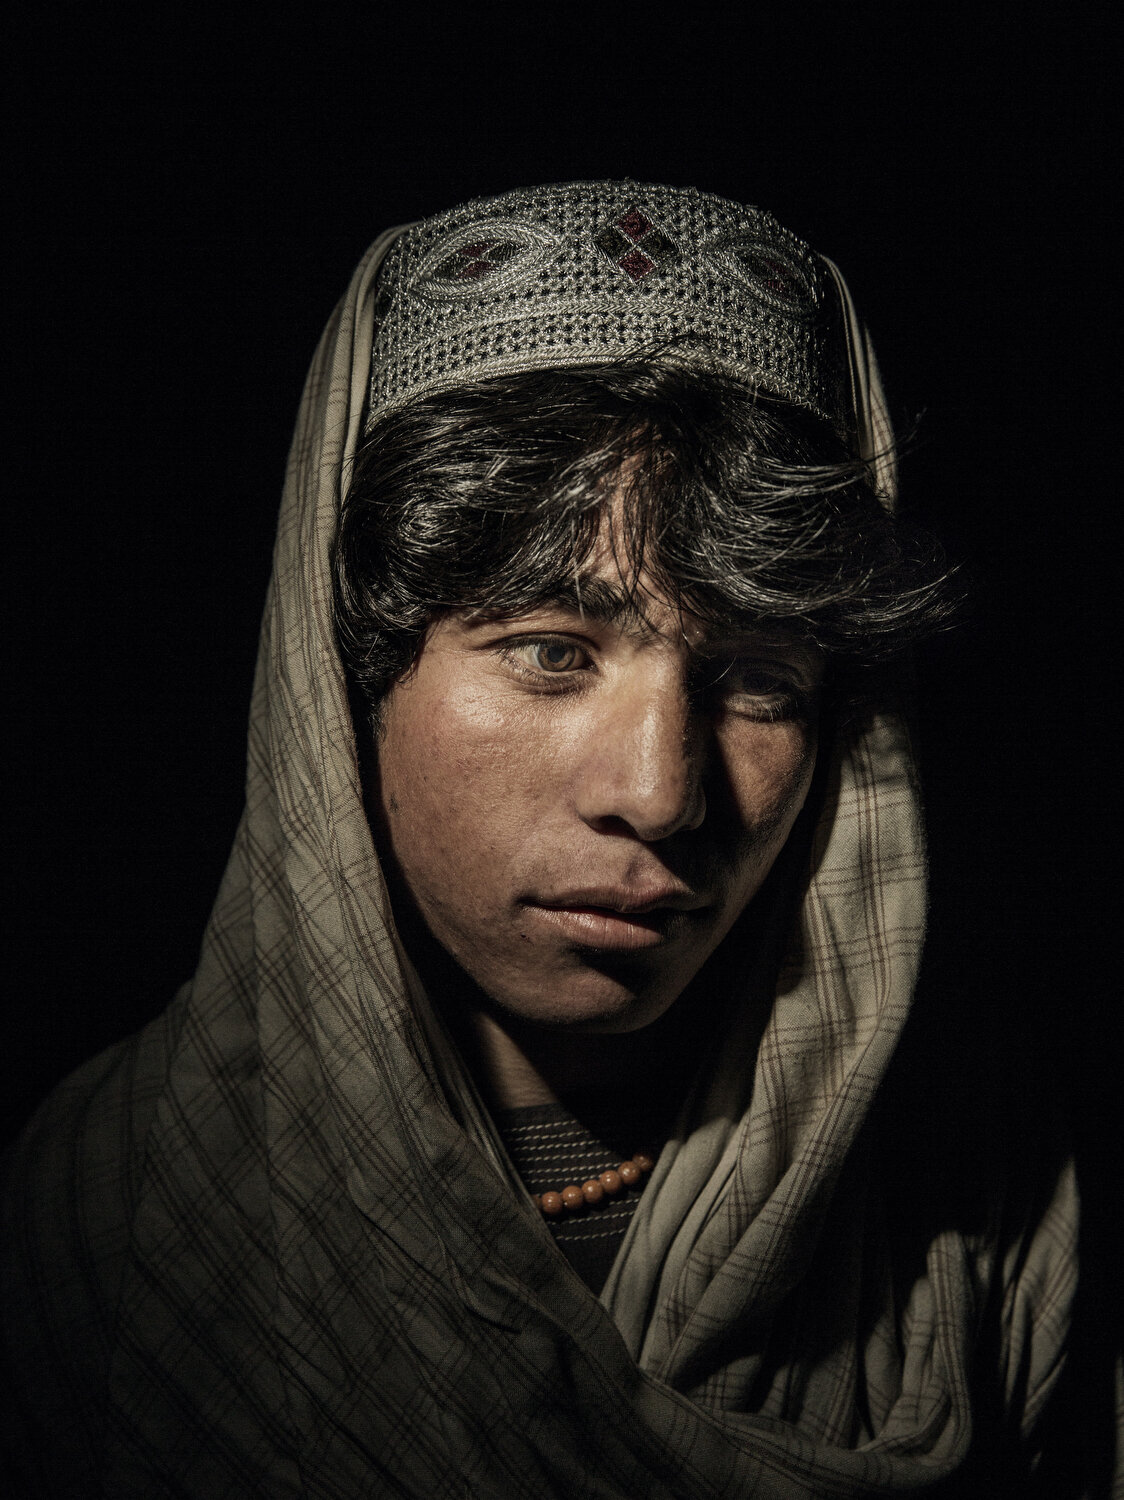  Dawar Khan, age 17 and an IDP from from Sangin District, Helmand Province, 2016. His home was hit by a mortar that killed two of his brothers, Afghanistan, 2016. 